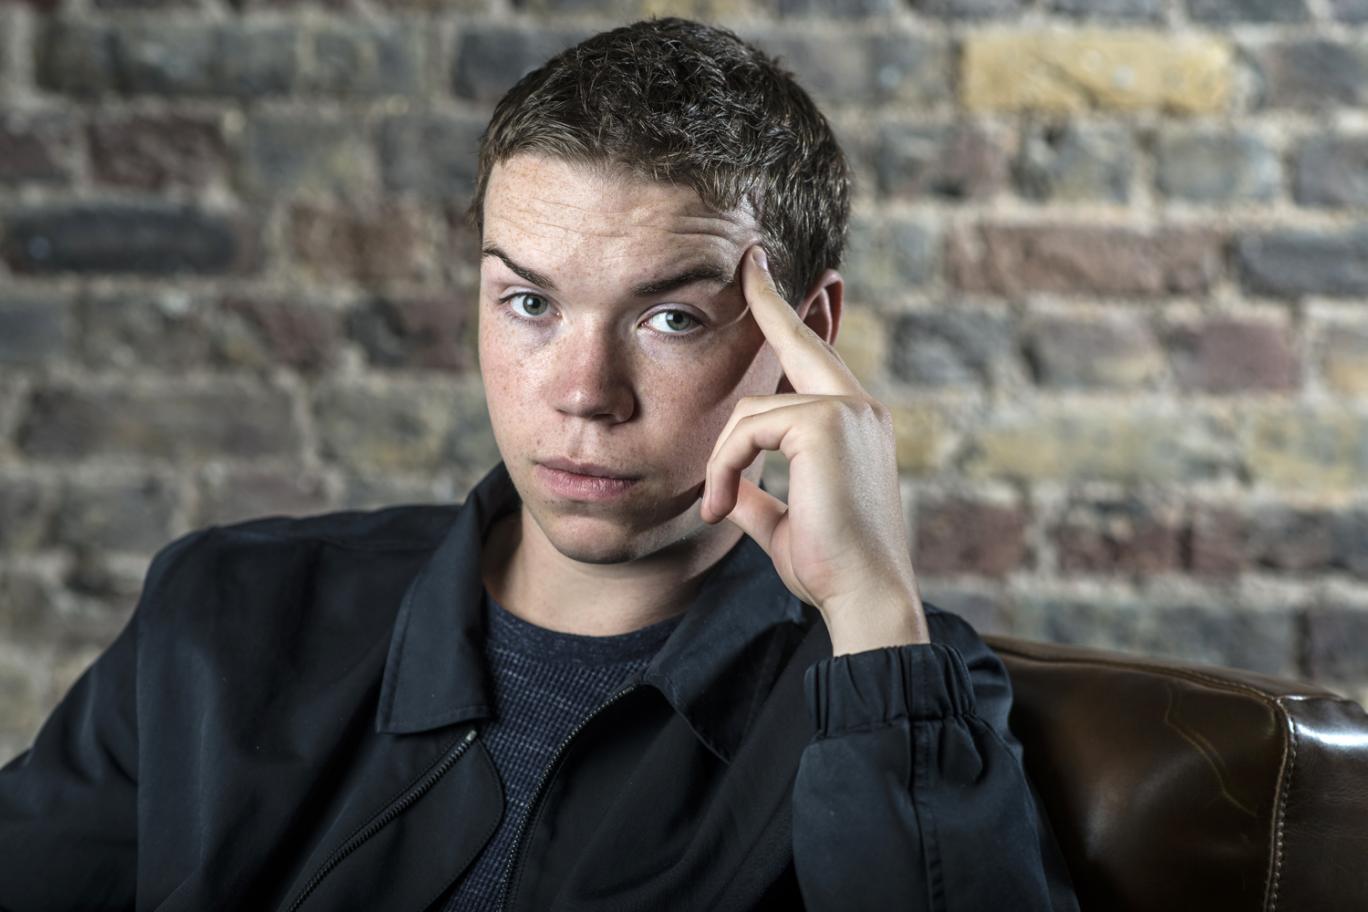 Free download Will Poulter HQ Photo Full HD Picture [1368x912] for your Desktop, Mobile & Tablet. Explore Will Poulter Wallpaper. Elf Wallpaper Will Ferrell, Wallpaper Will Not Come Off